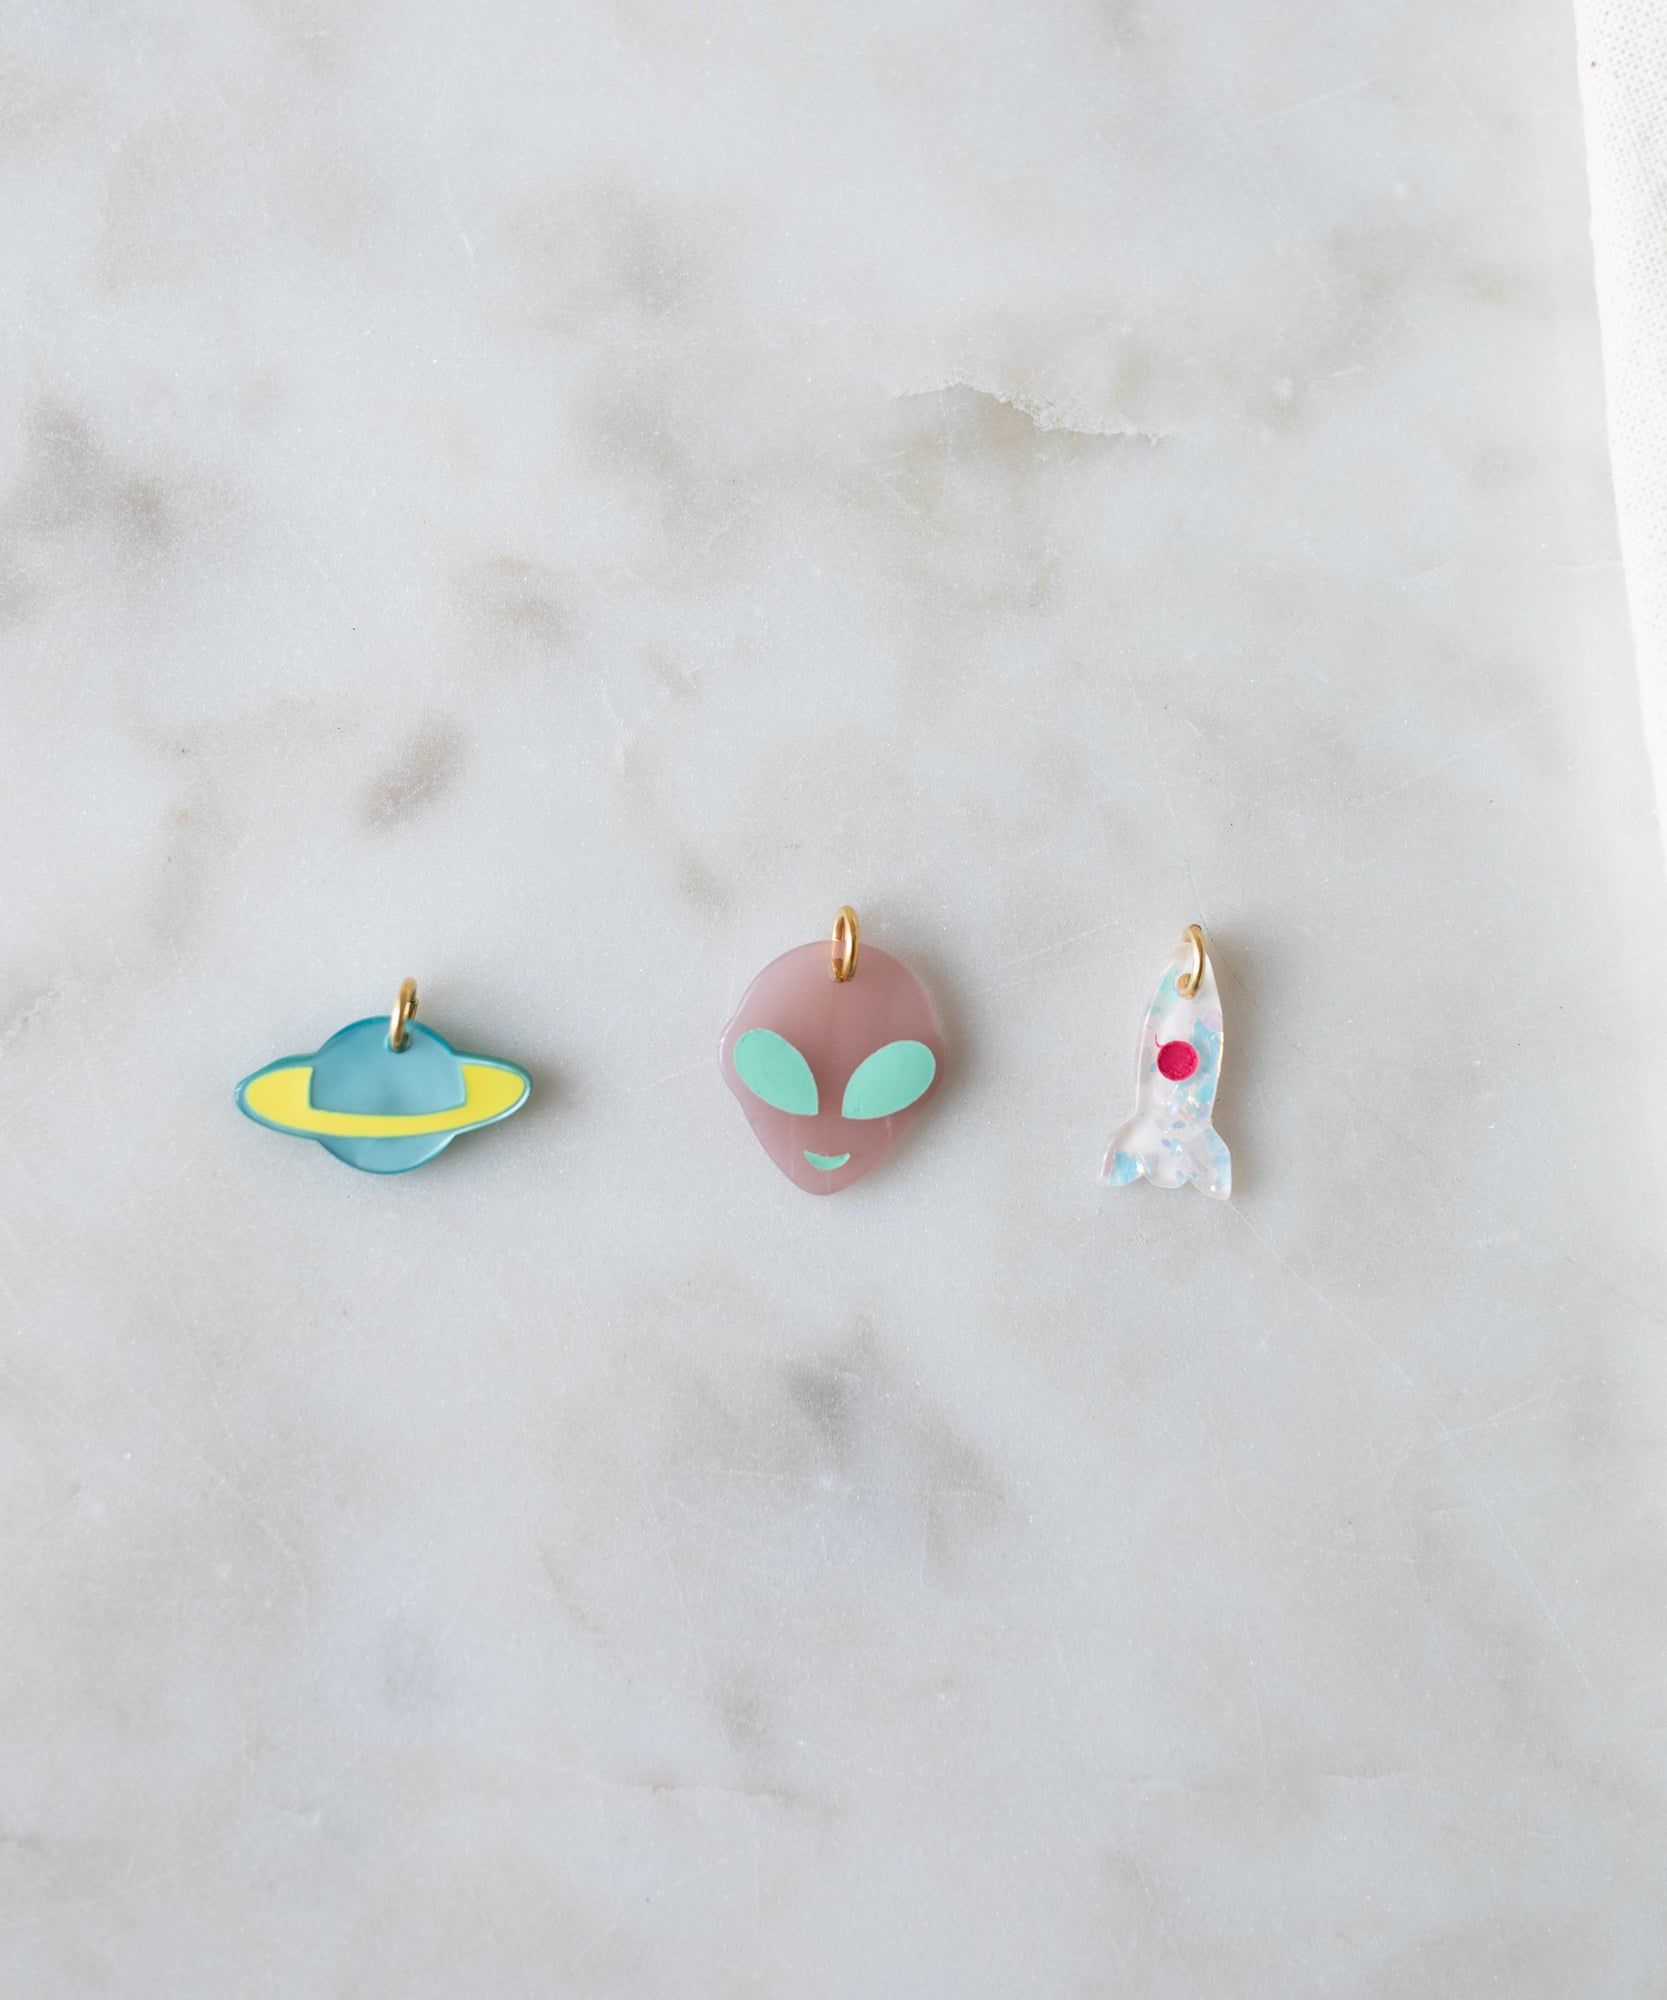 Three quirky keychains on a marble surface: a planet, an Alien Charm, and a ghost from the WALD World collection, each with colorful, minimalist designs.